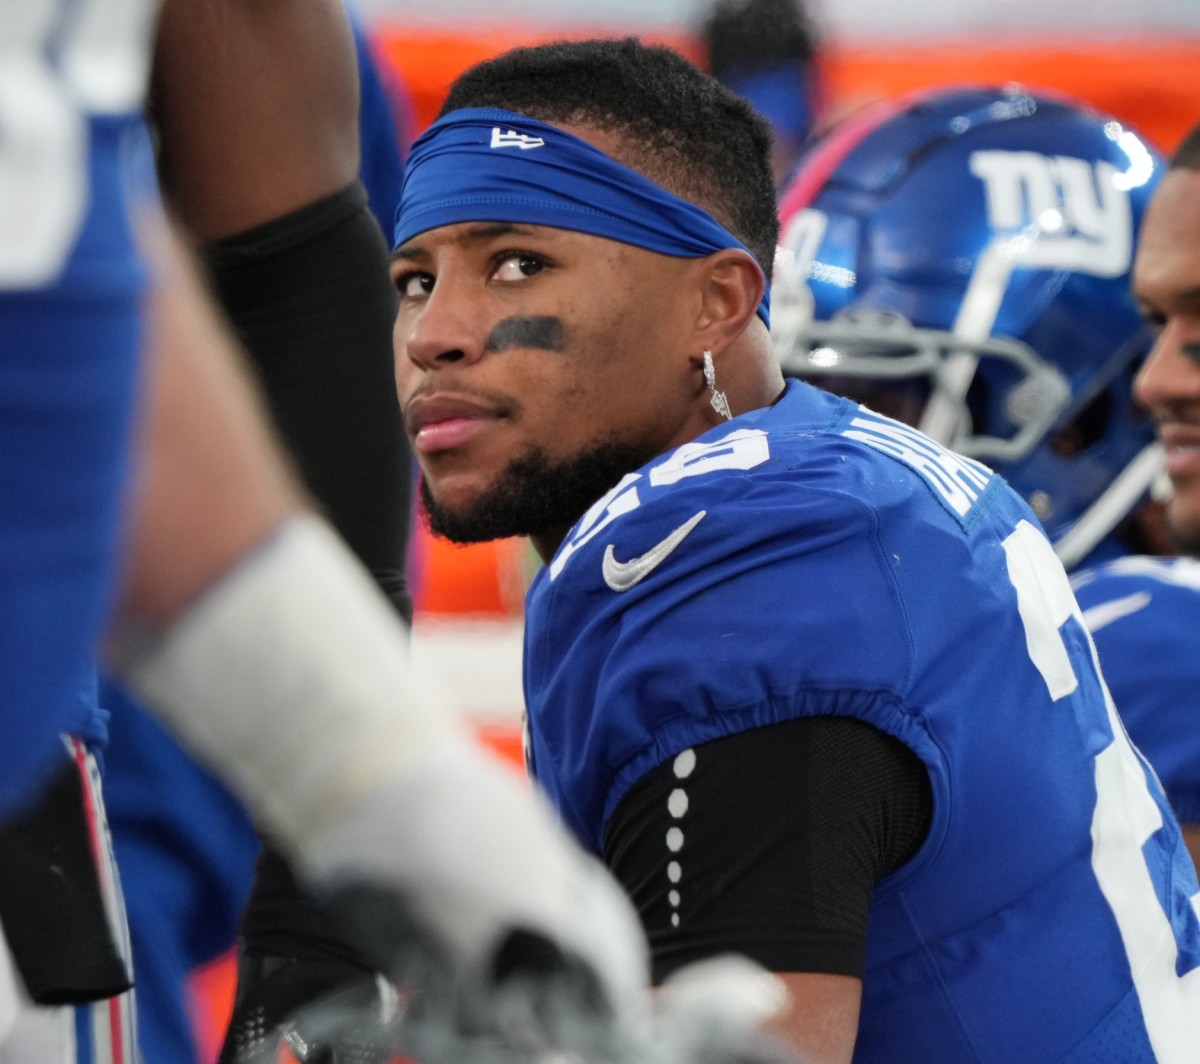 Saquon Barkley of the Giants in the second half. The Houston Texans at the New York Giants in a game played at MetLife Stadium in East Rutherford, NJ on November 13, 2022.